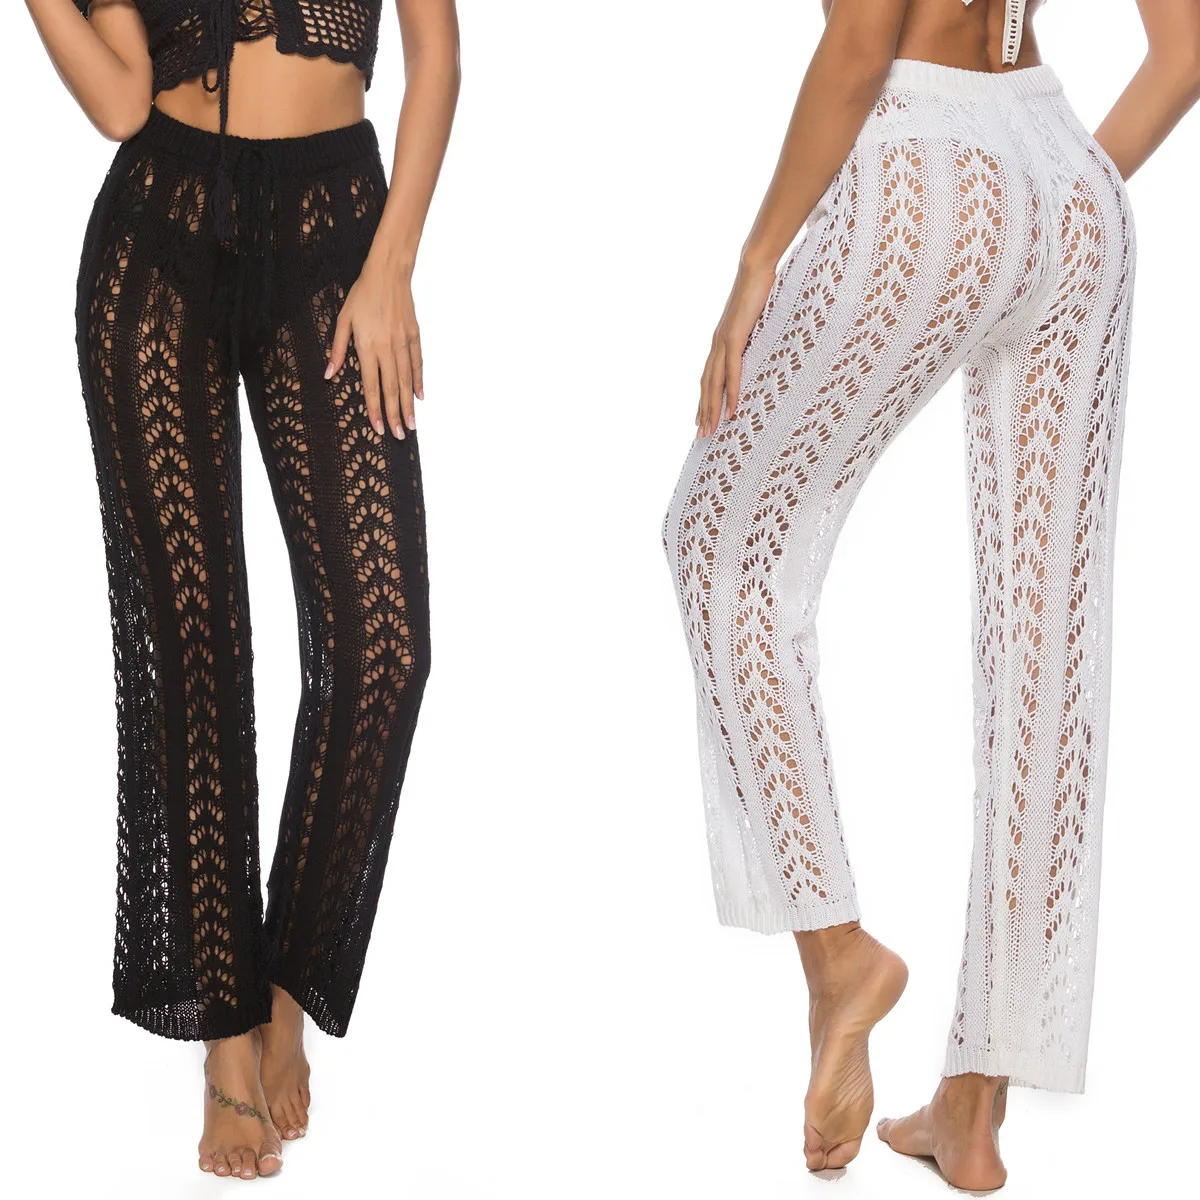 

2021 Women Summer Beach Style Solid Drawstring Pants Knitted Hollow See Through High Waist Casual Sexy Sunscreen Trousers, Black/white/apricot